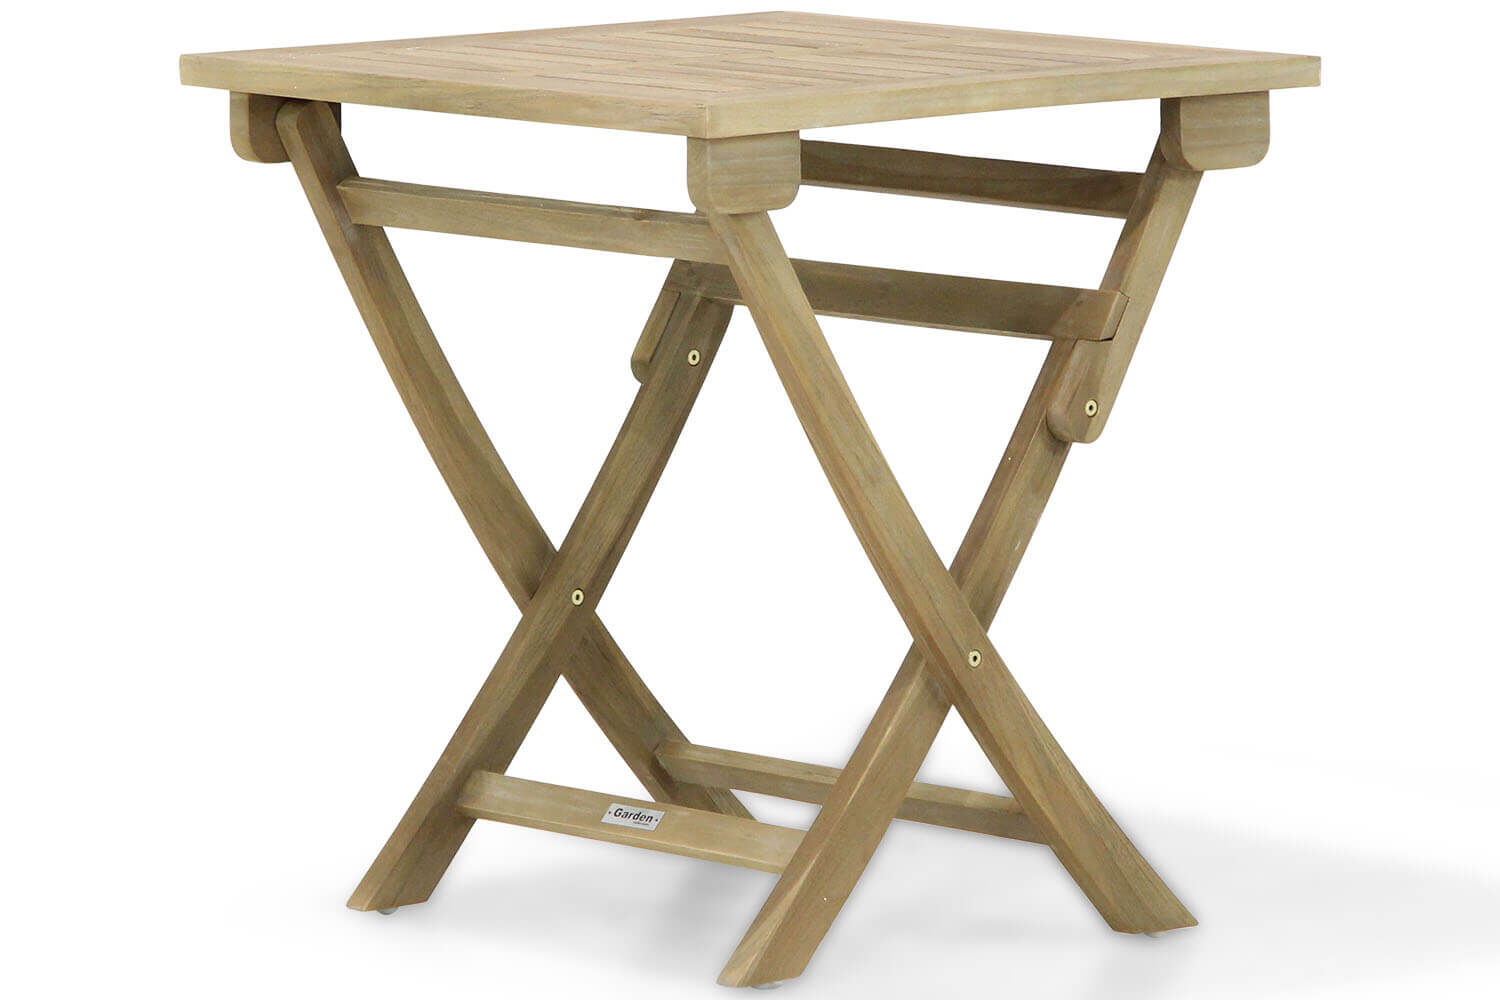 risico Is Uitwisseling Garden Collections Derby inklapbare dining tuintafel 70 x 70 cm -  Tuinmeubelshop.nl